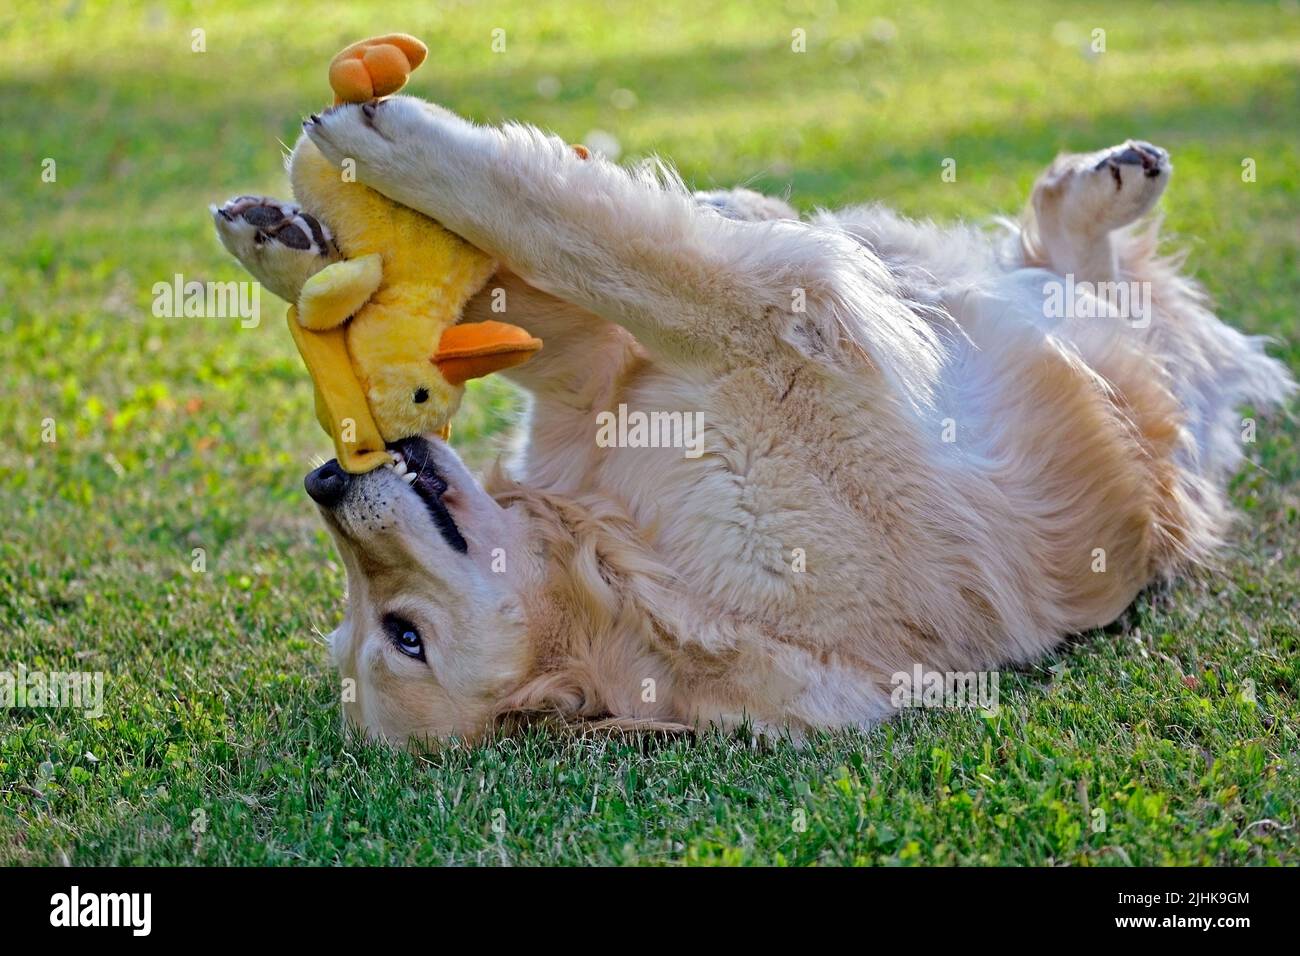 Golden Retriever in yard, playing with Toy Duck Stock Photo